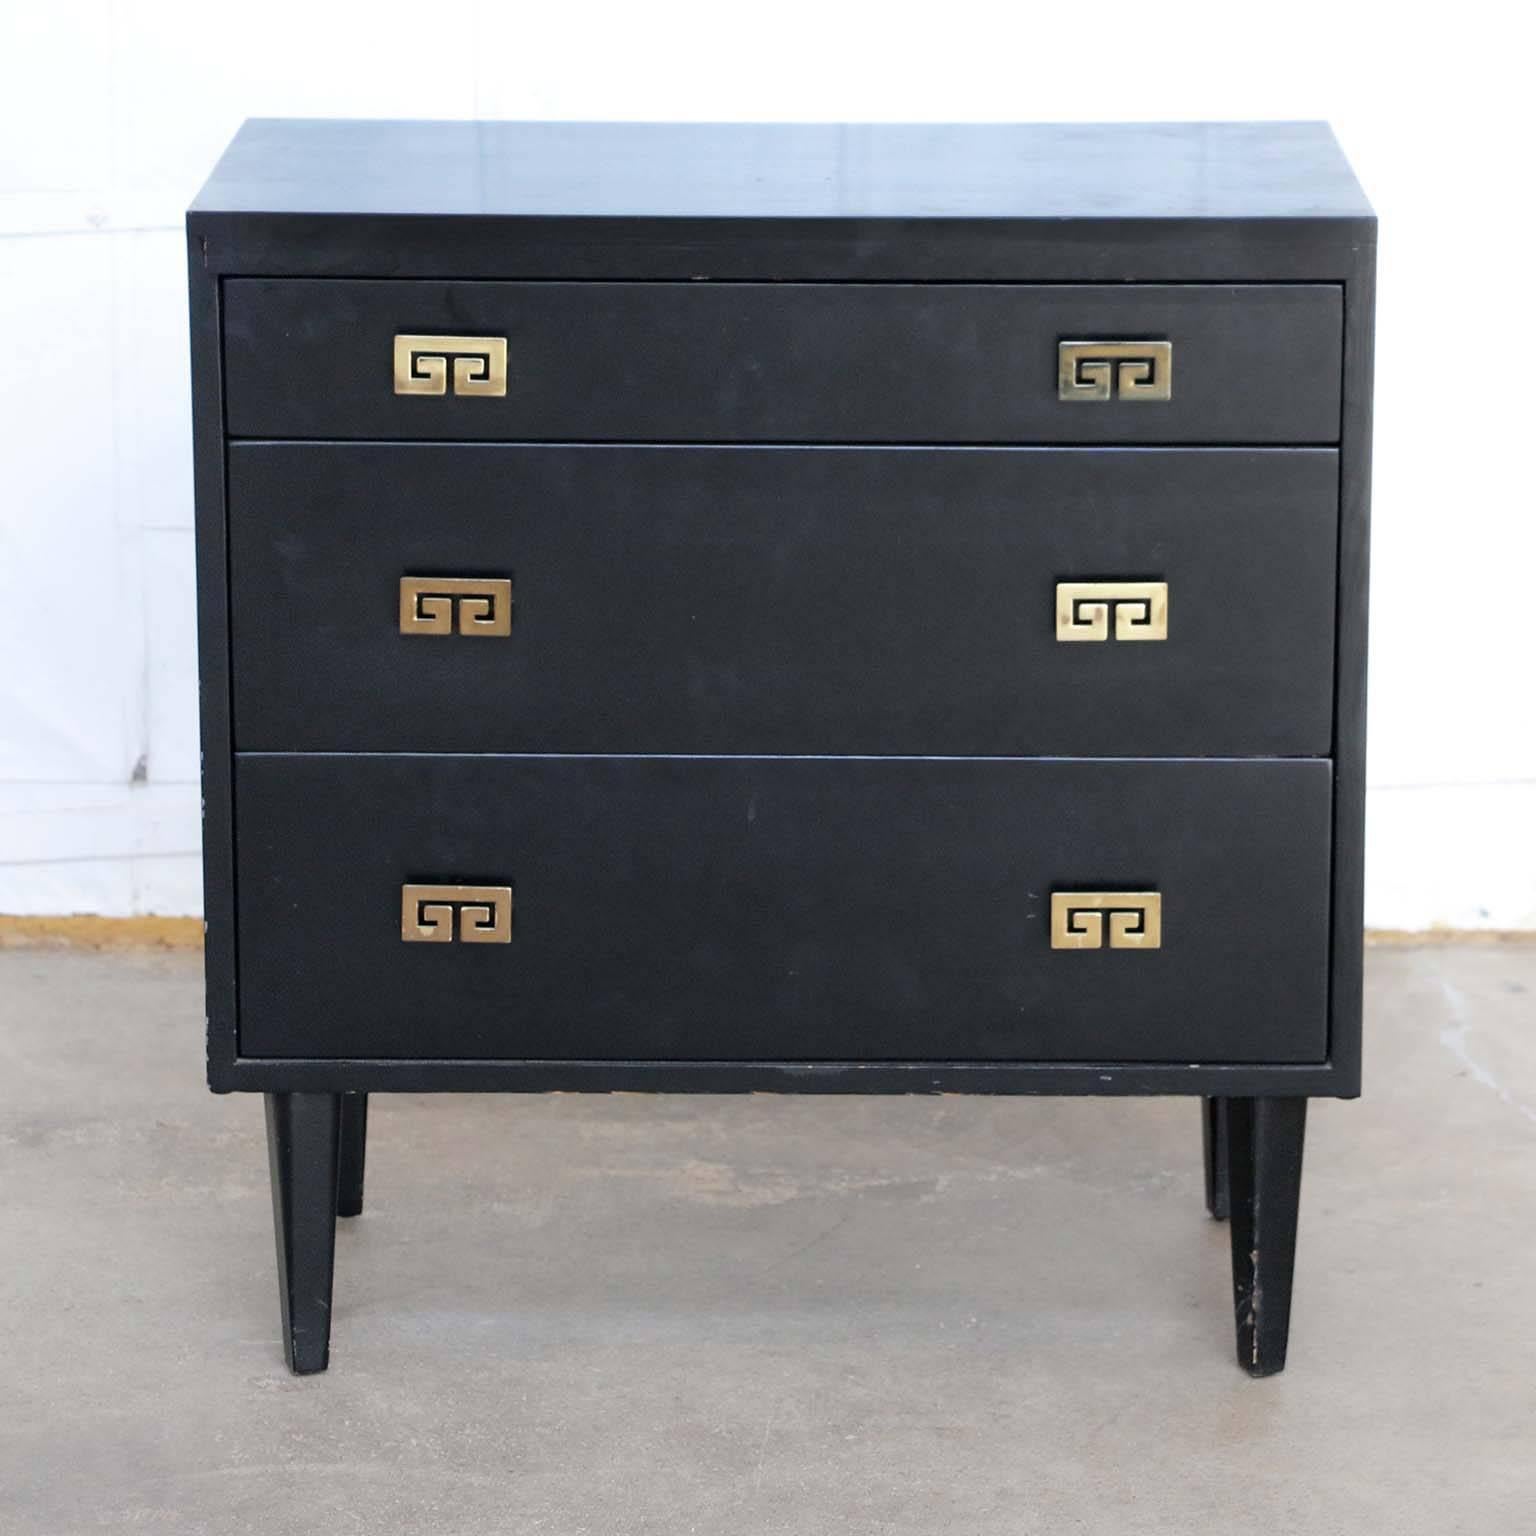 Elegant Mid-Century Modern ebonized three-drawer dresser or chest of drawers. Made in the manner of James Mont by Woodland of California. Featuring a black finish with decorative brass pulls in a Greek key motif. The dresser is supported by tapered